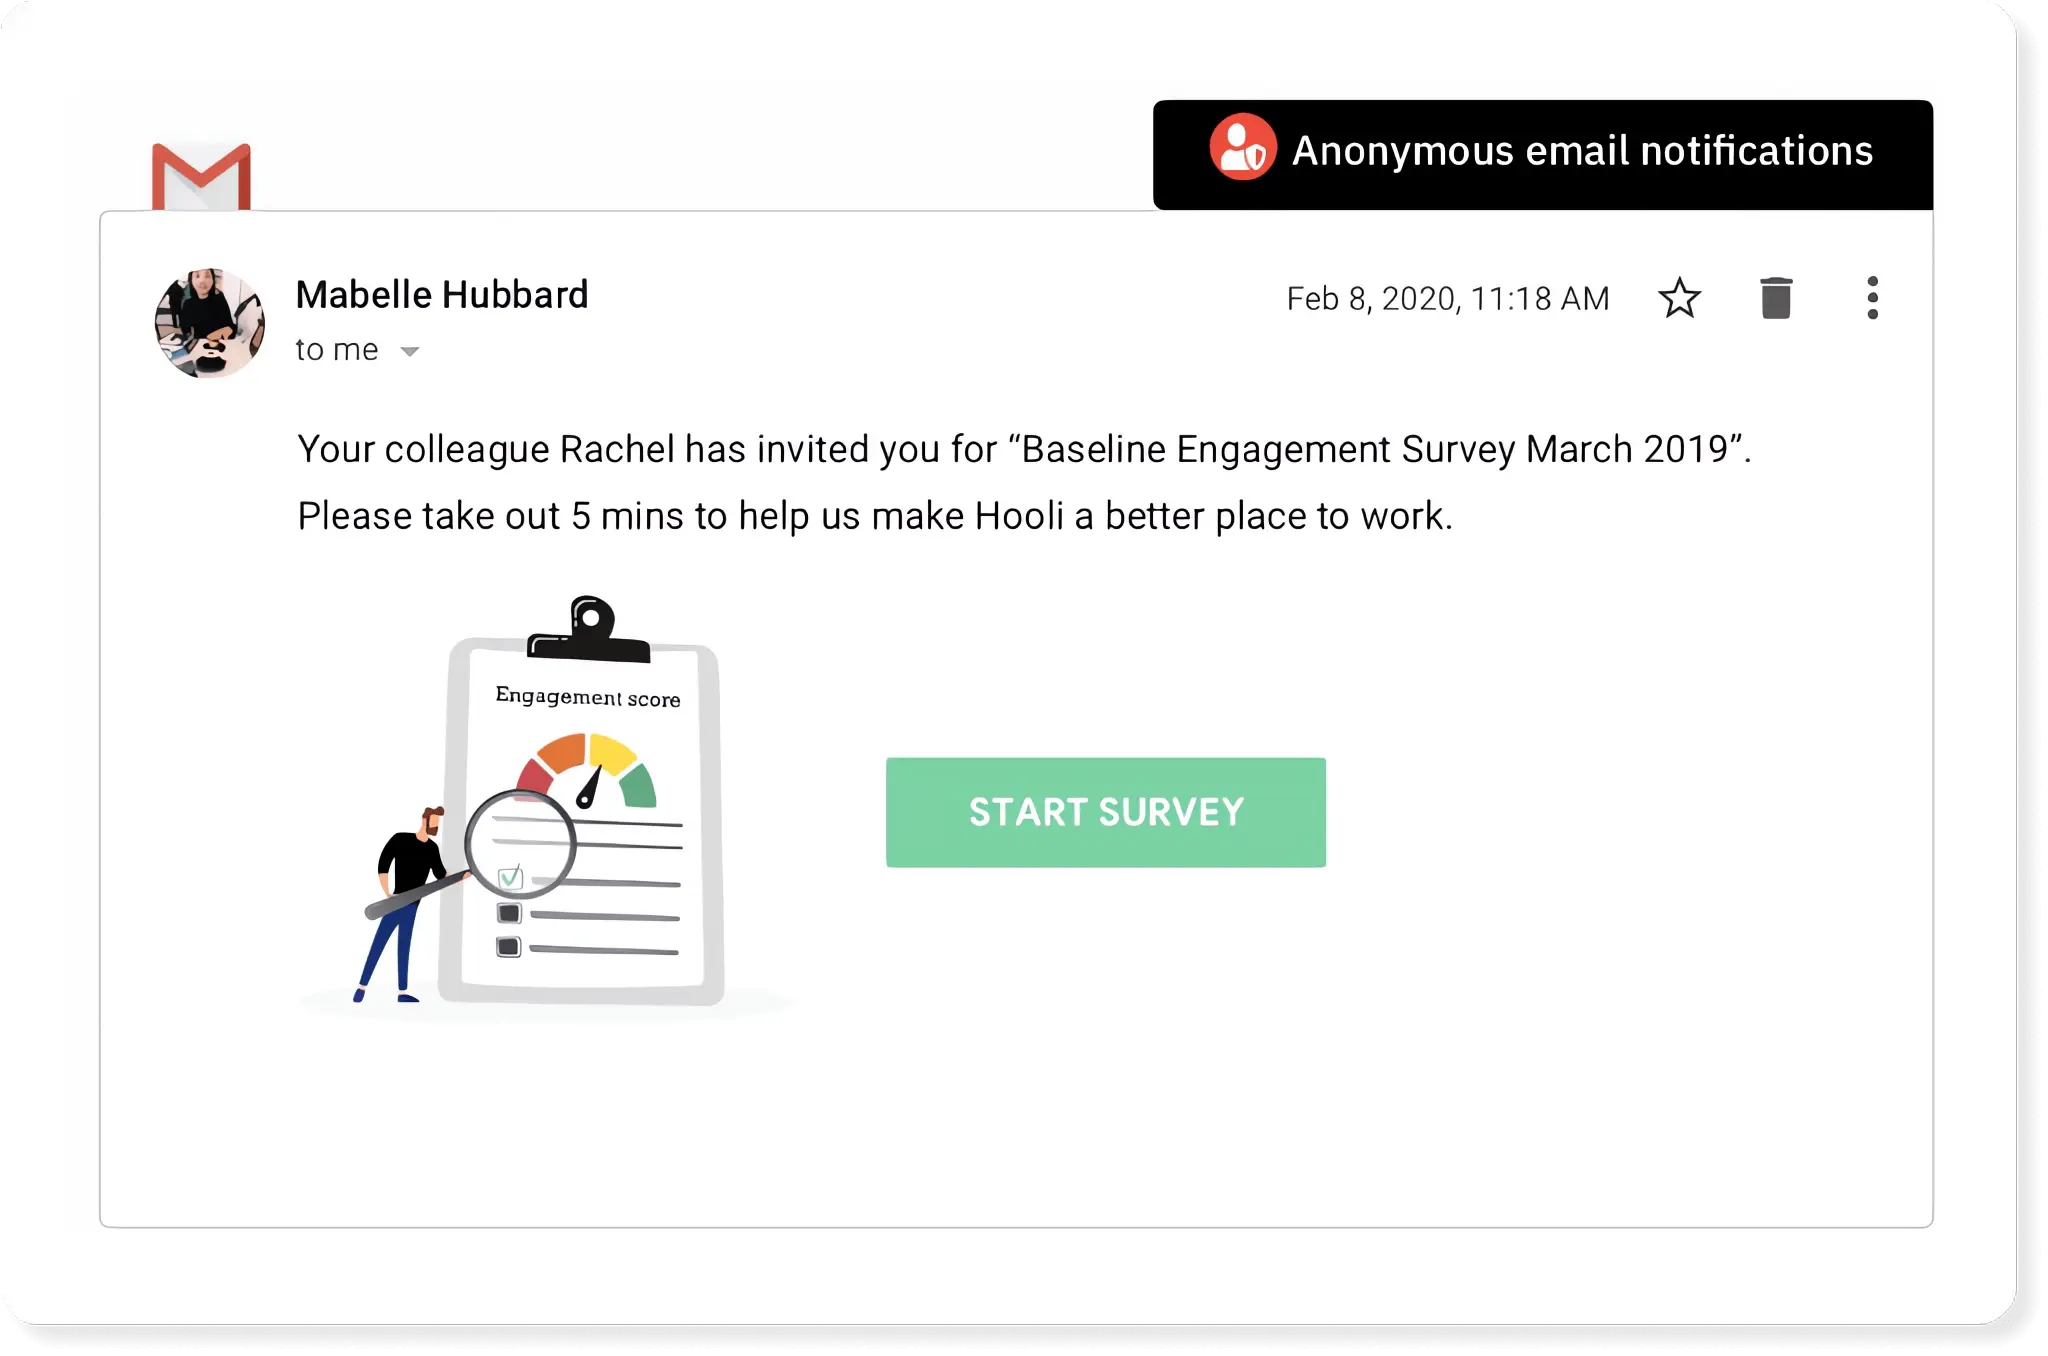 Employees get anonymous notifications for their surveys to protect their privacy